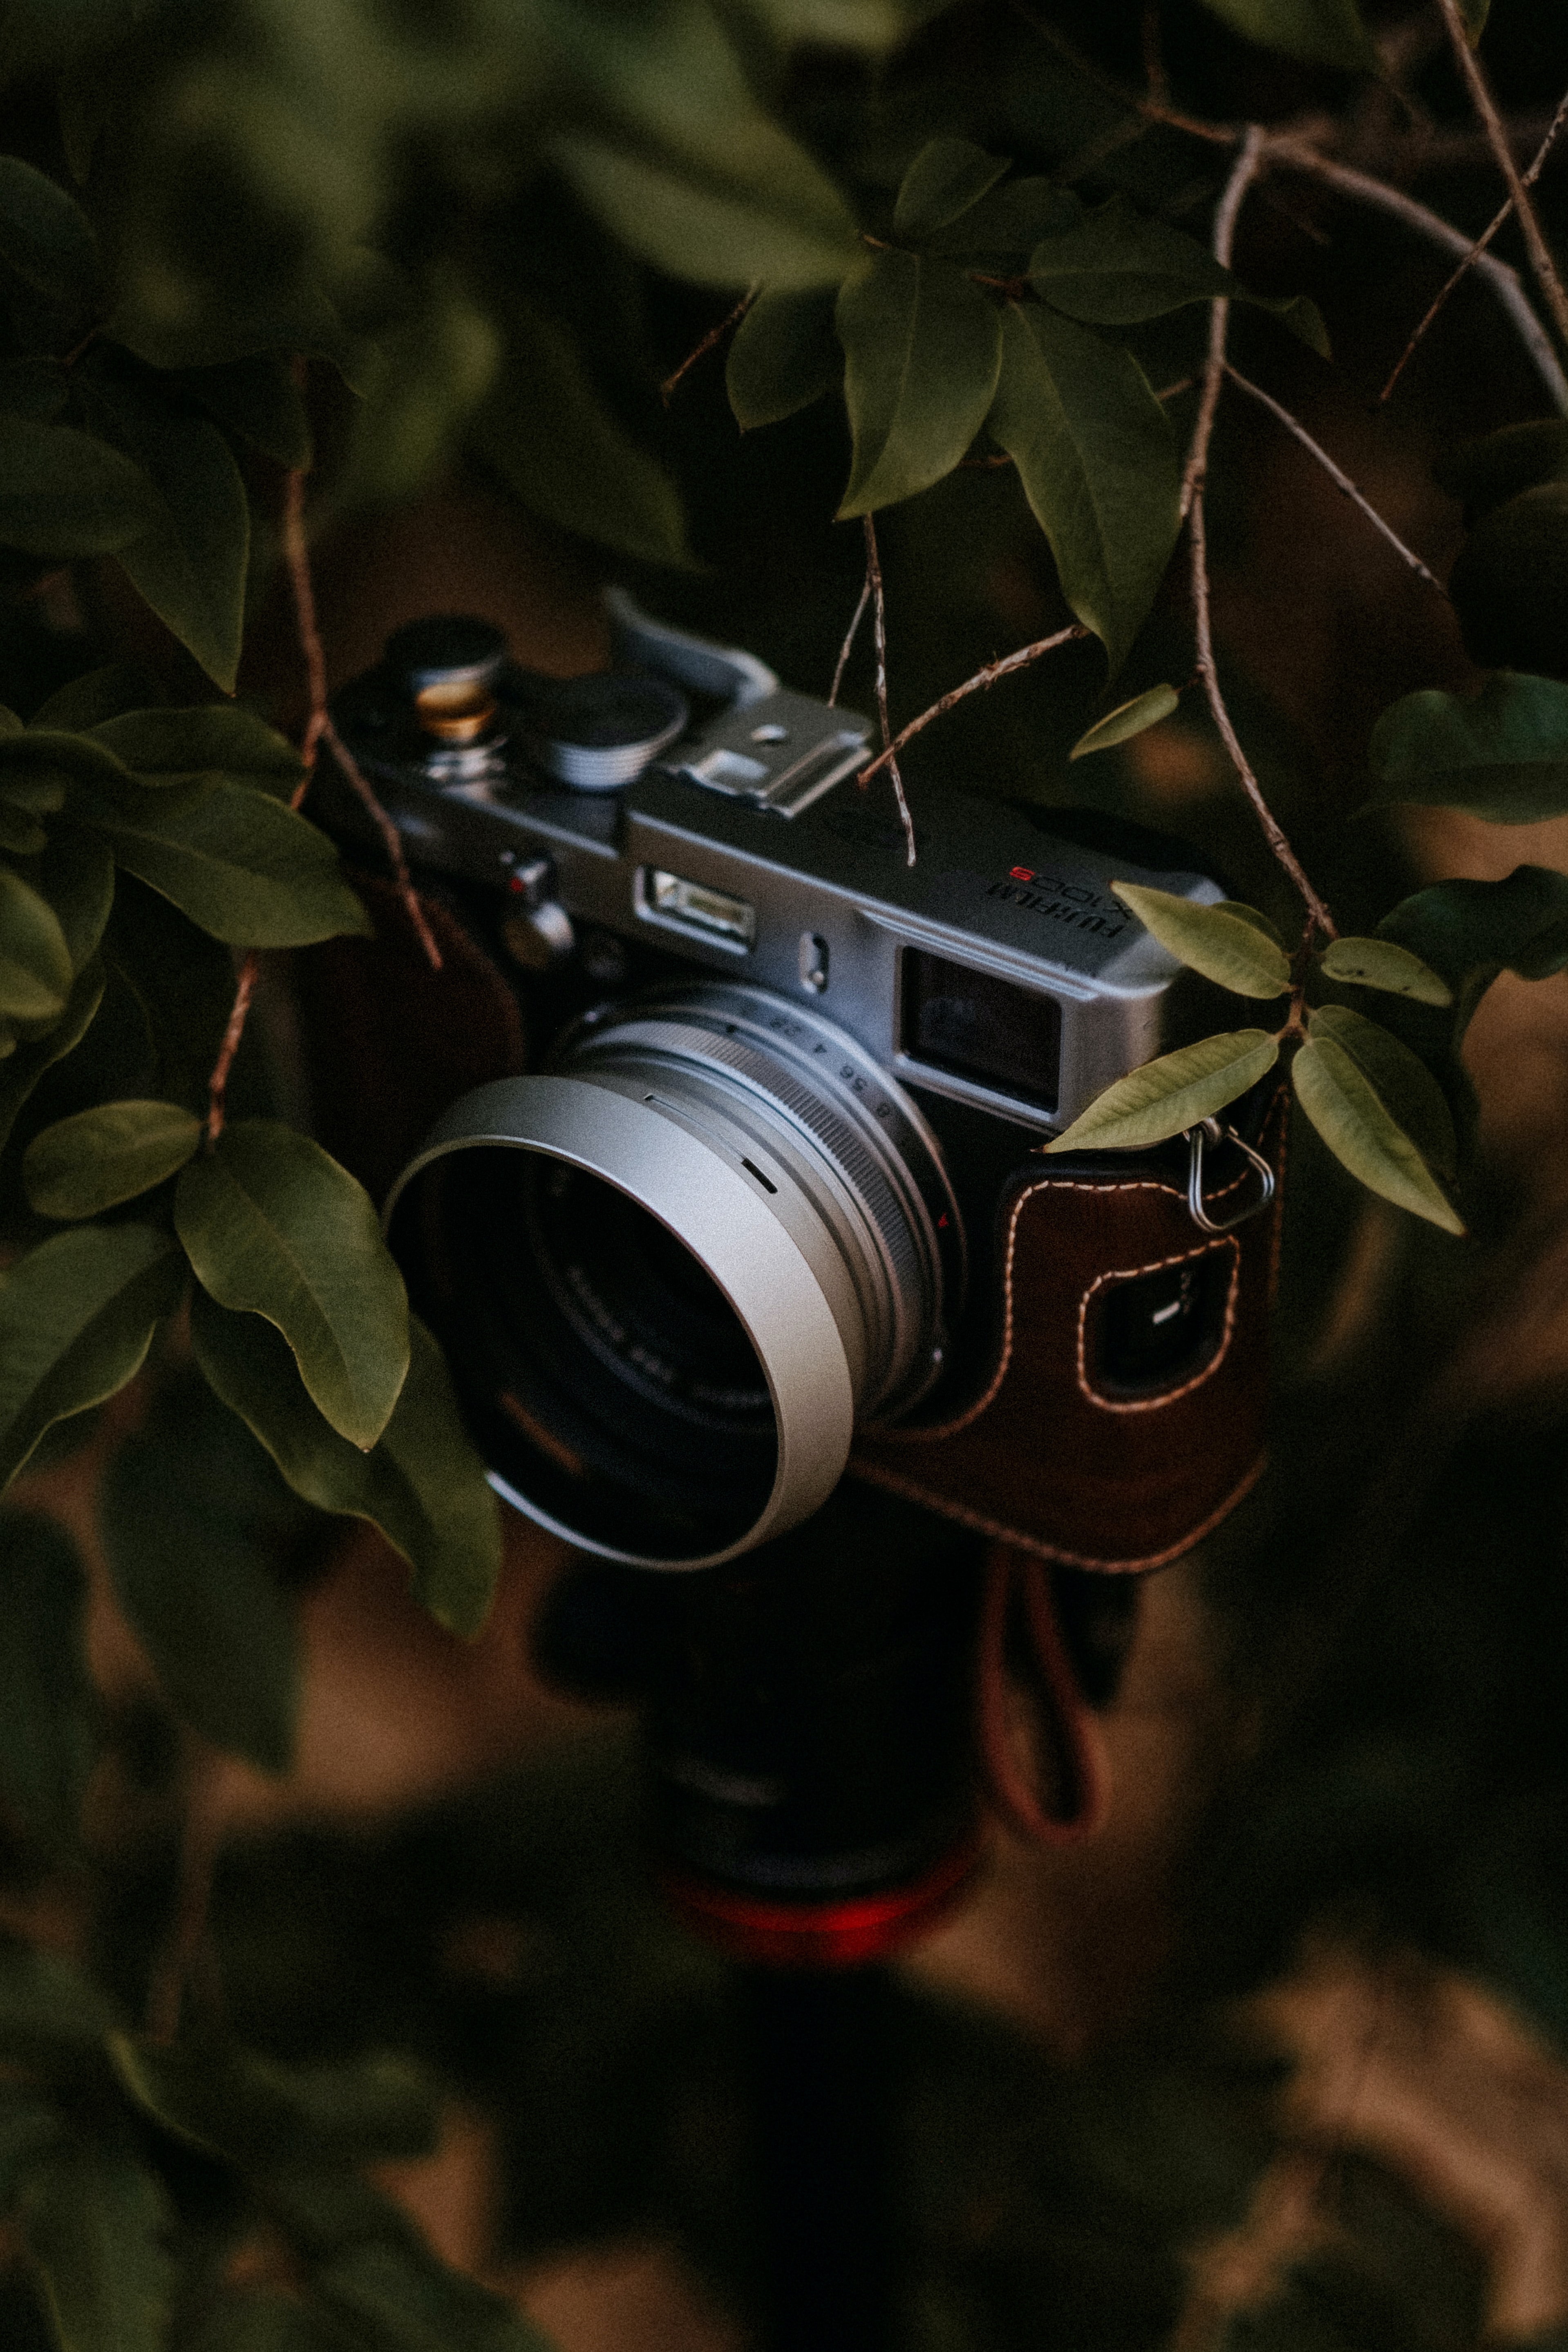 camera, technology, leaves, branch, grey, technologies High Definition image